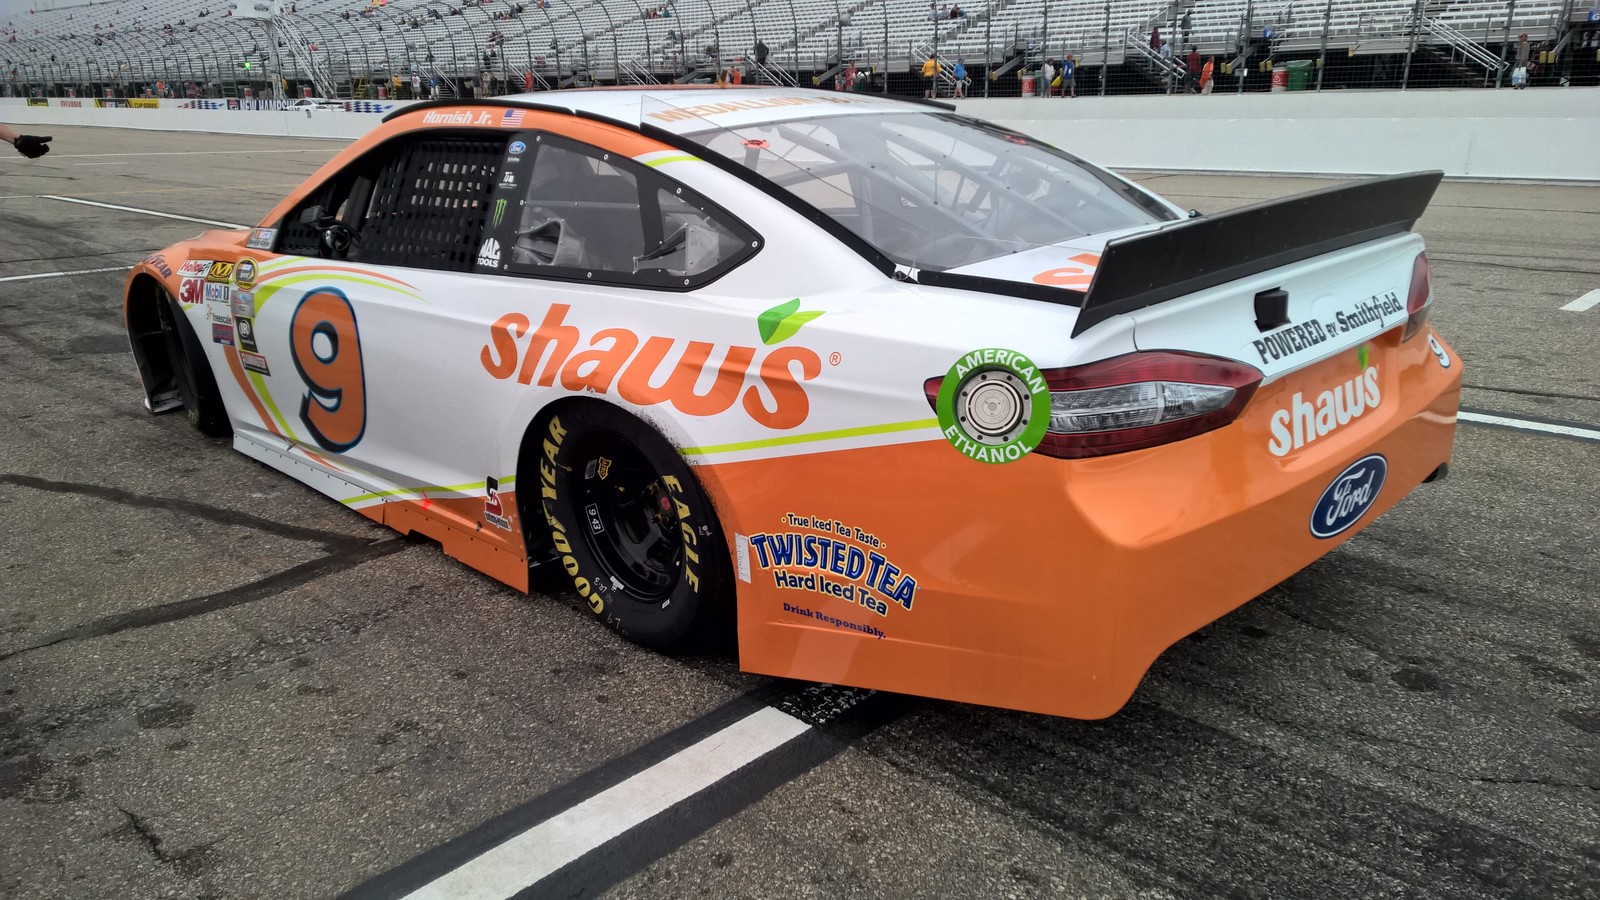 The #9 Shaw's Supermarkets Ford Fusion during a practice session at New Hampshire Motor Speedway on July 18th, 2015.